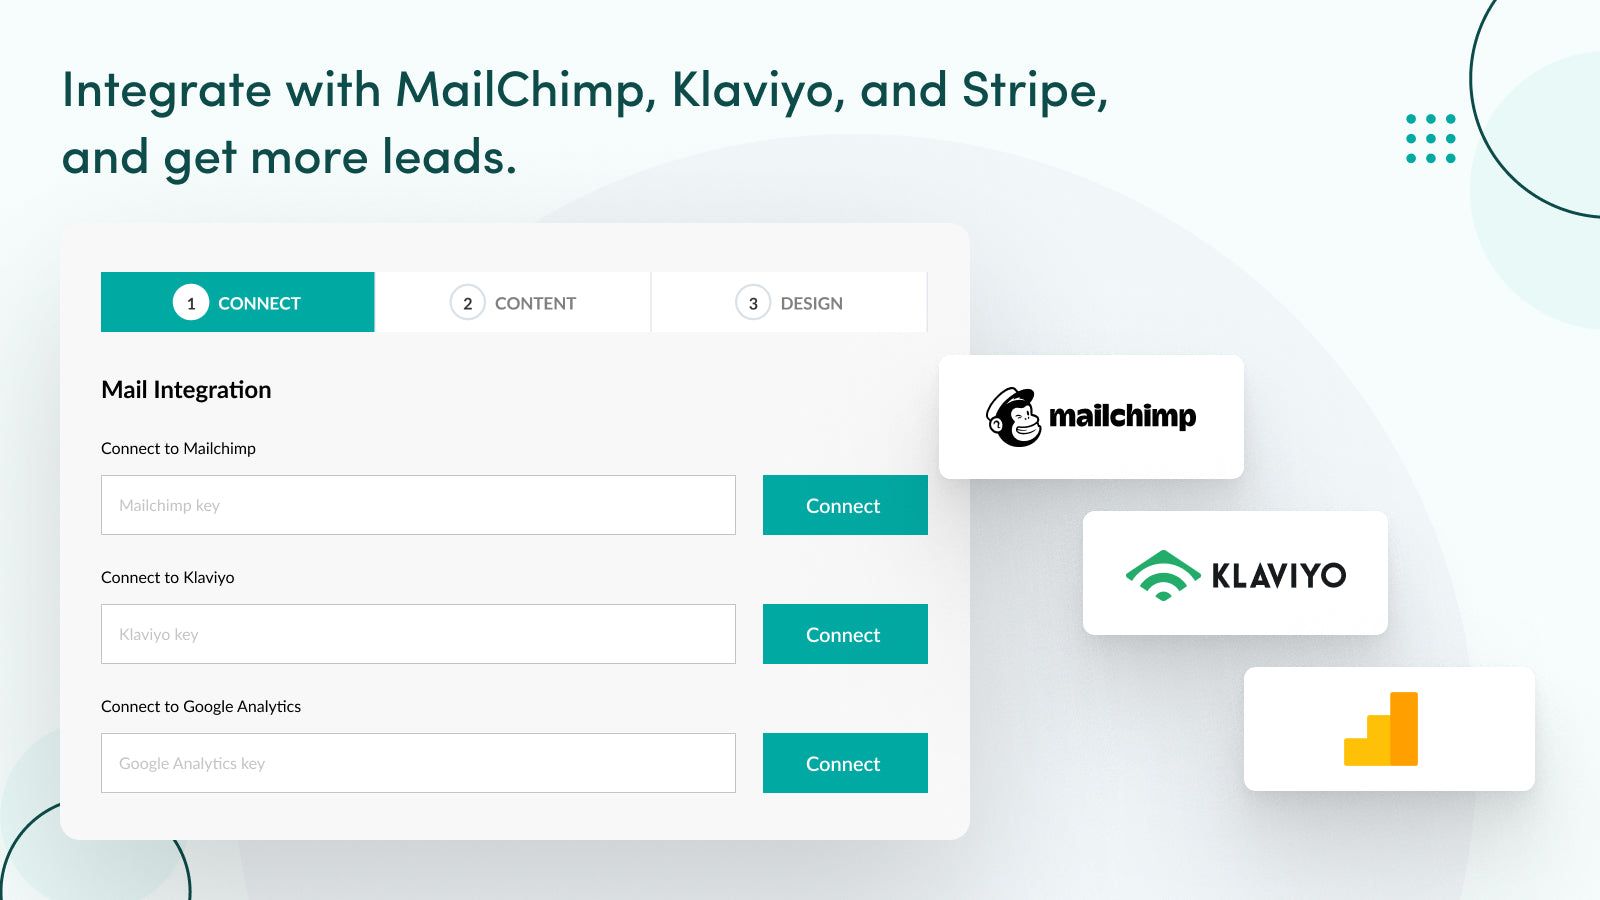 Get more leads by integrating with MailChimp, Klaviyo, etc.